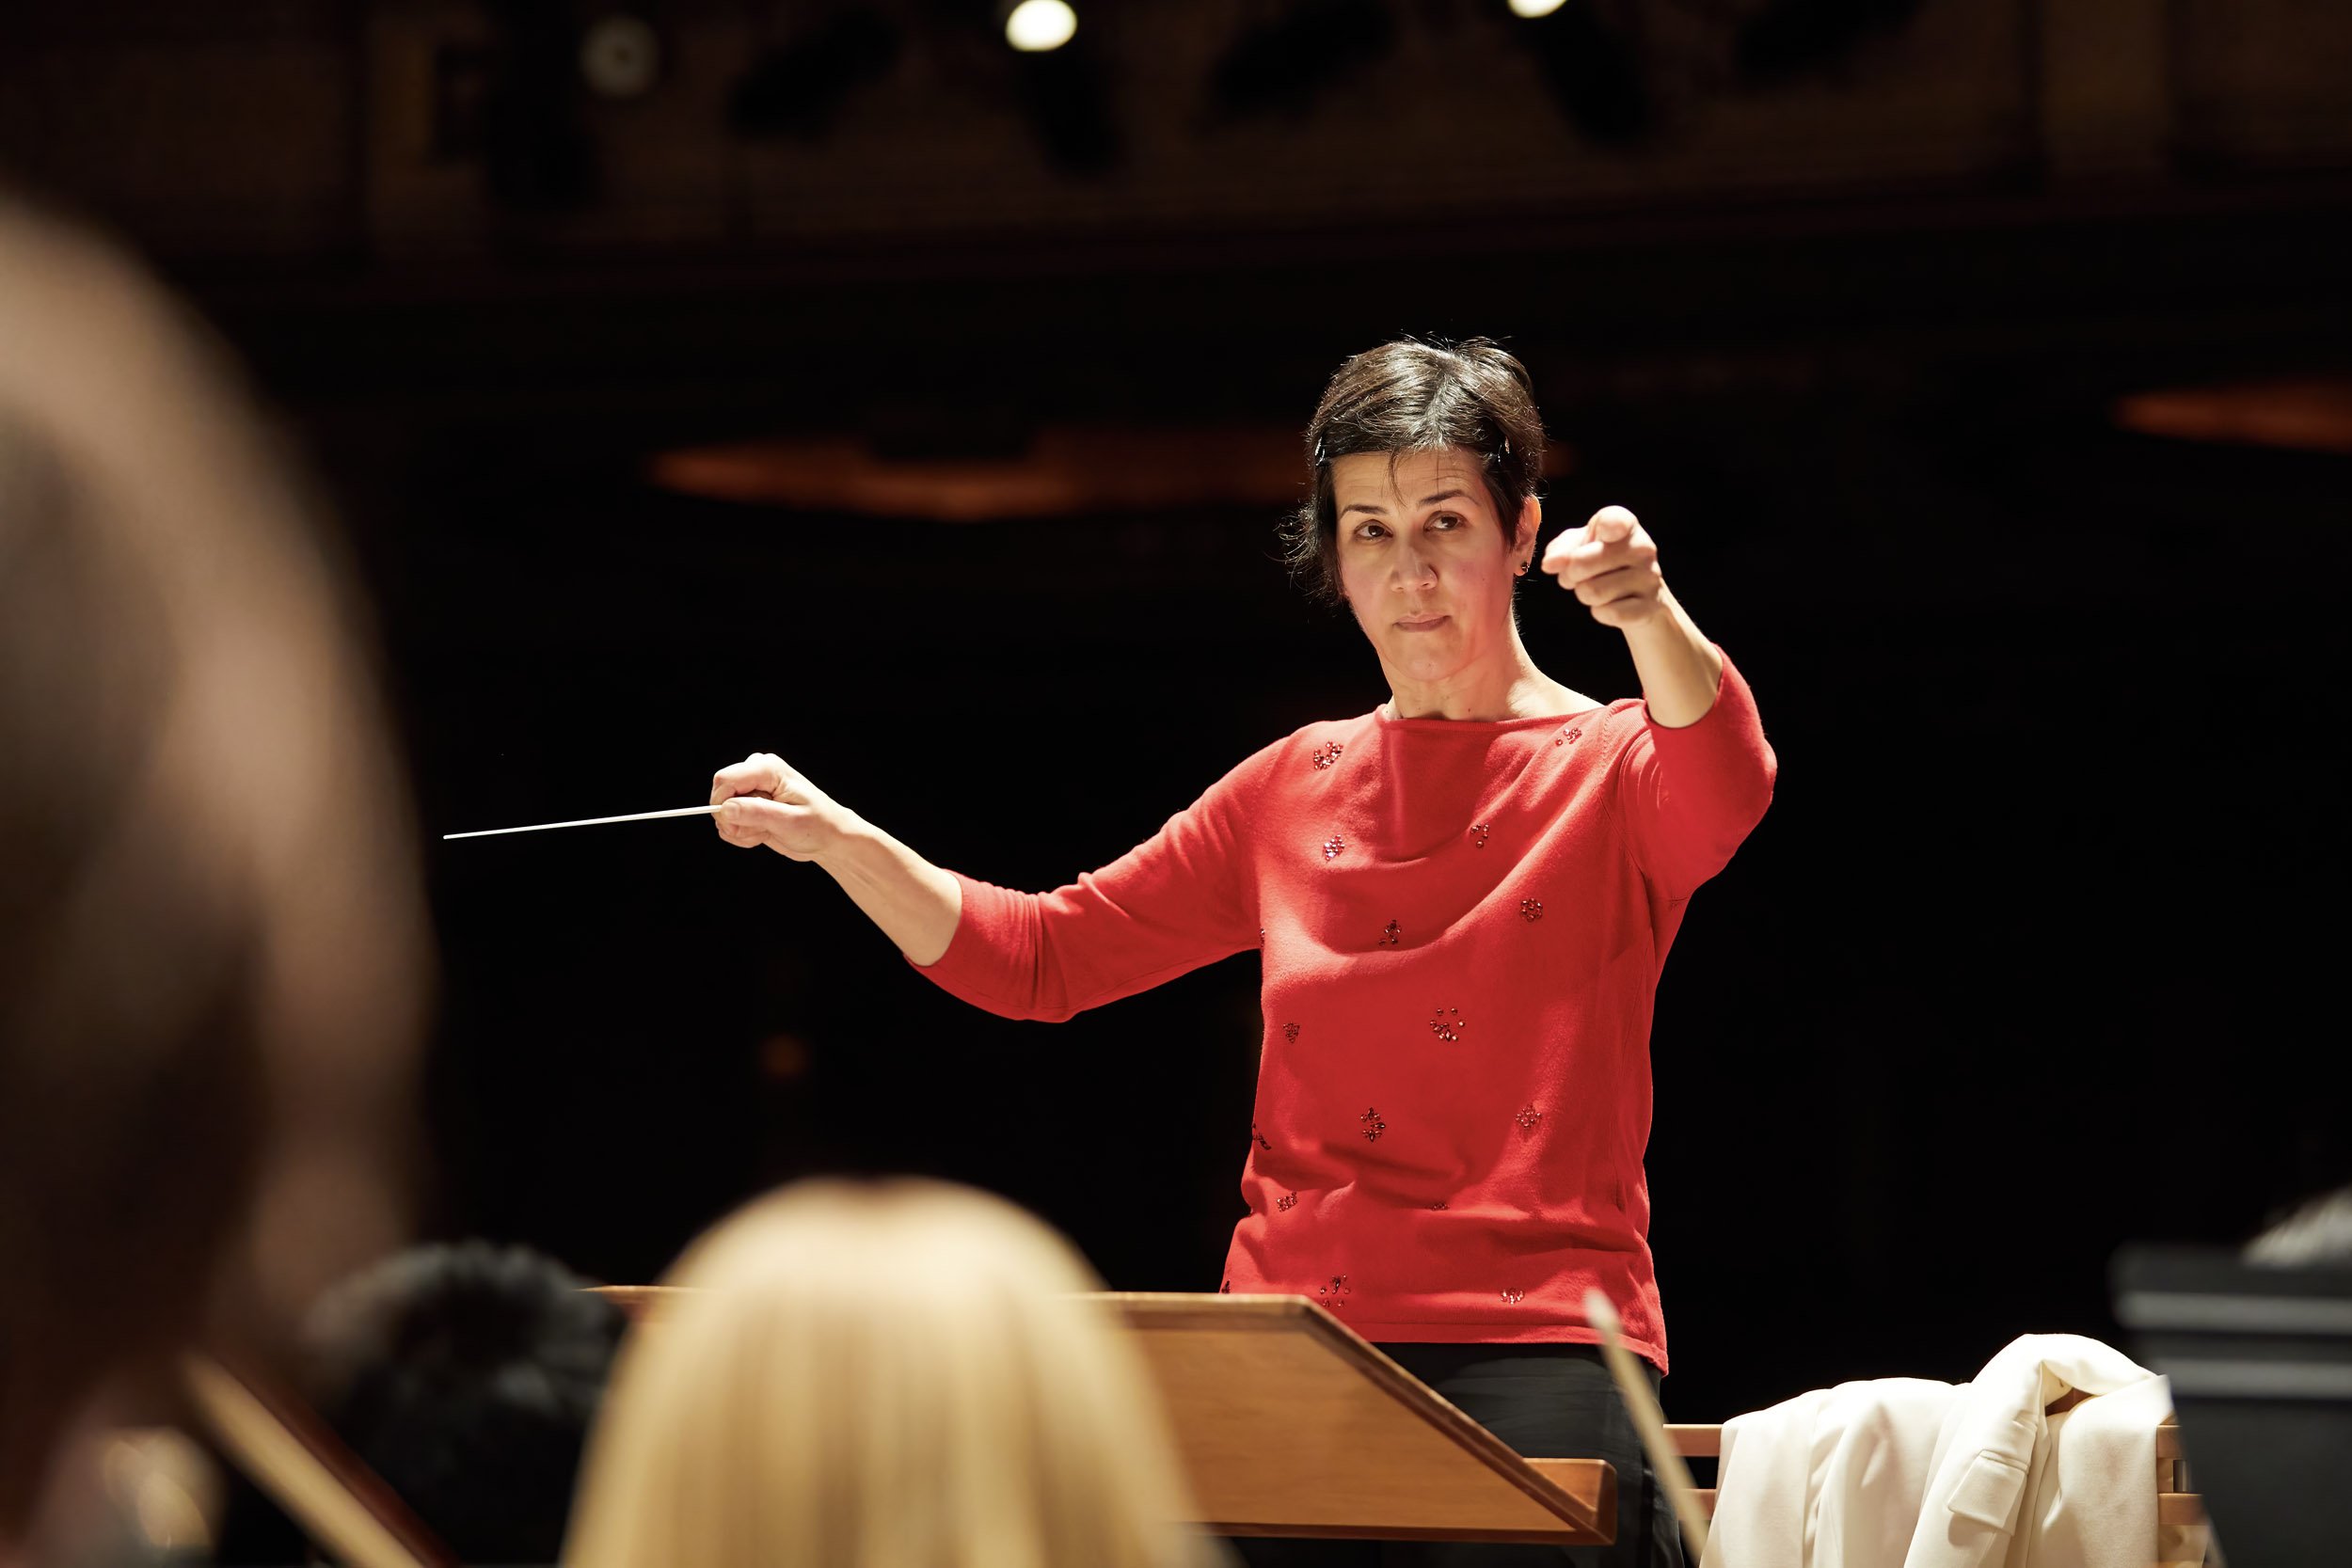  Conductor Ines Voglar Belgique leads a young string ensemble for the Portland Youth Philarmonic at Arlene Schnitzer Concert Hall in Portland, Oregon. 